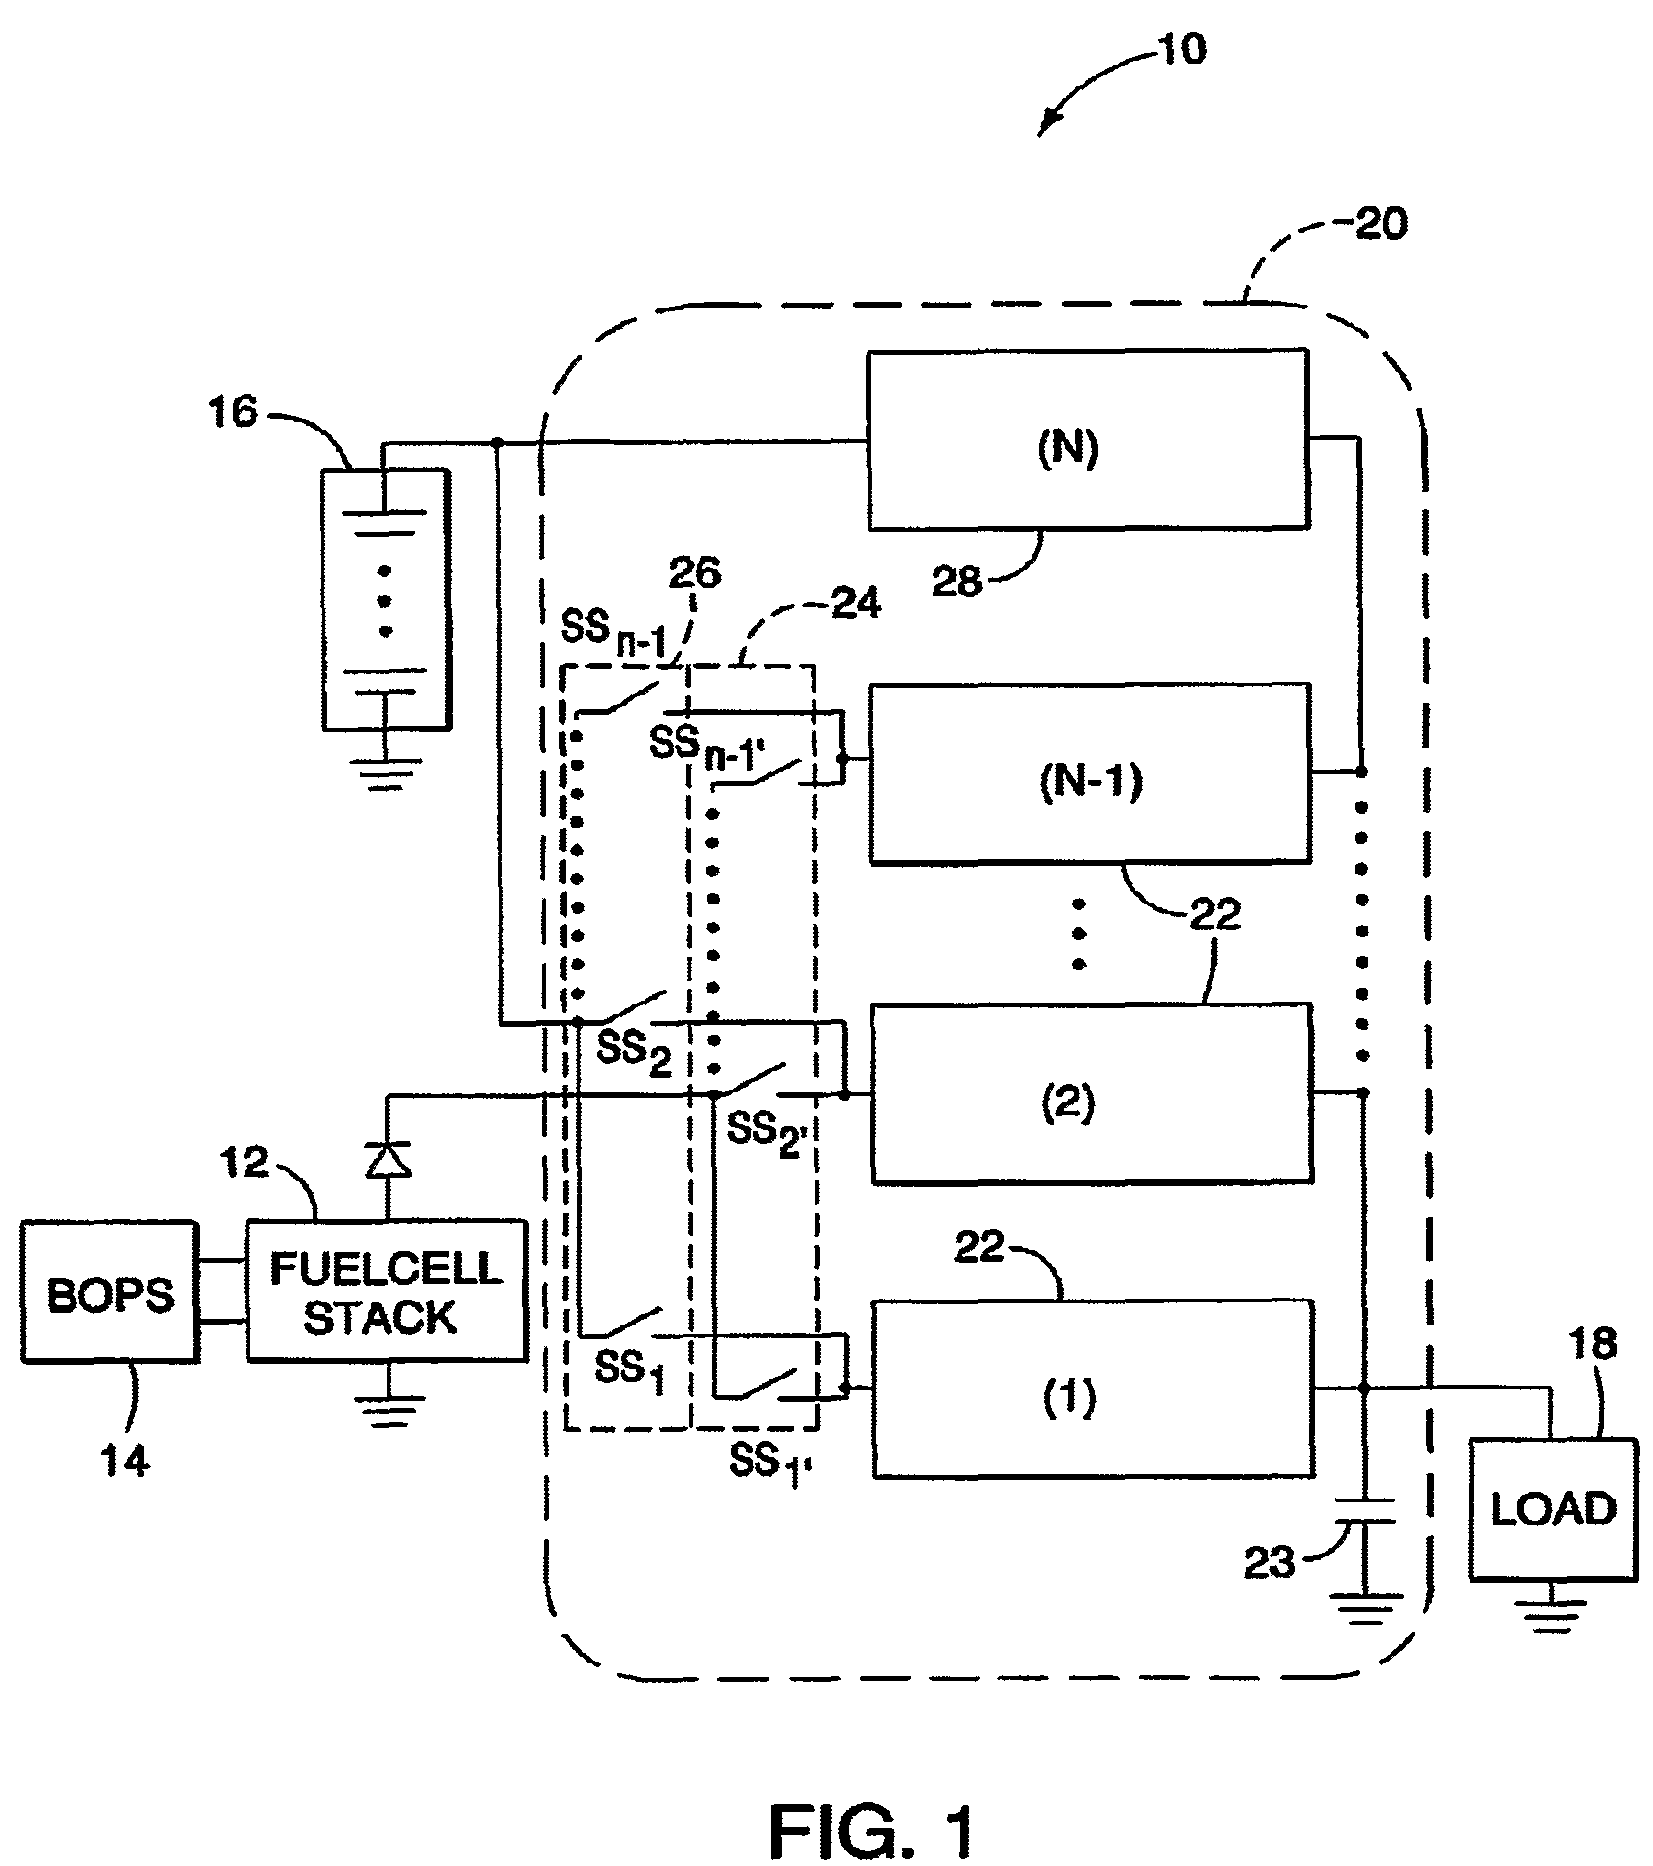 Fuel-cell based power generating system having power conditioning apparatus